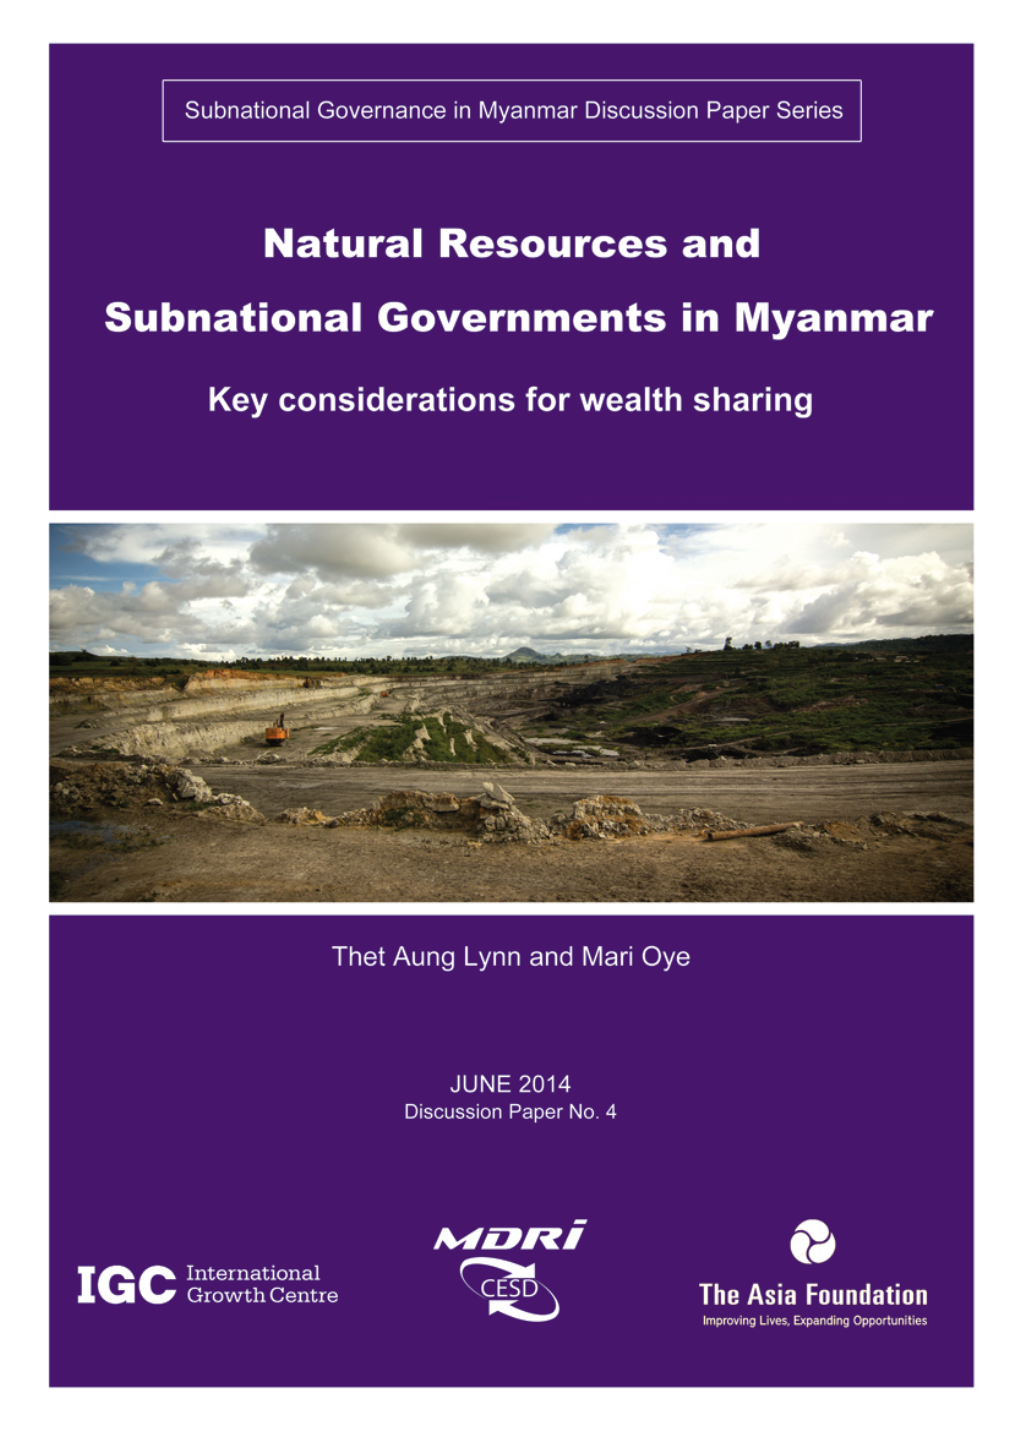 Natural Resources and Subnational Governments in Myanmar: Key Considerations for Wealth Sharing